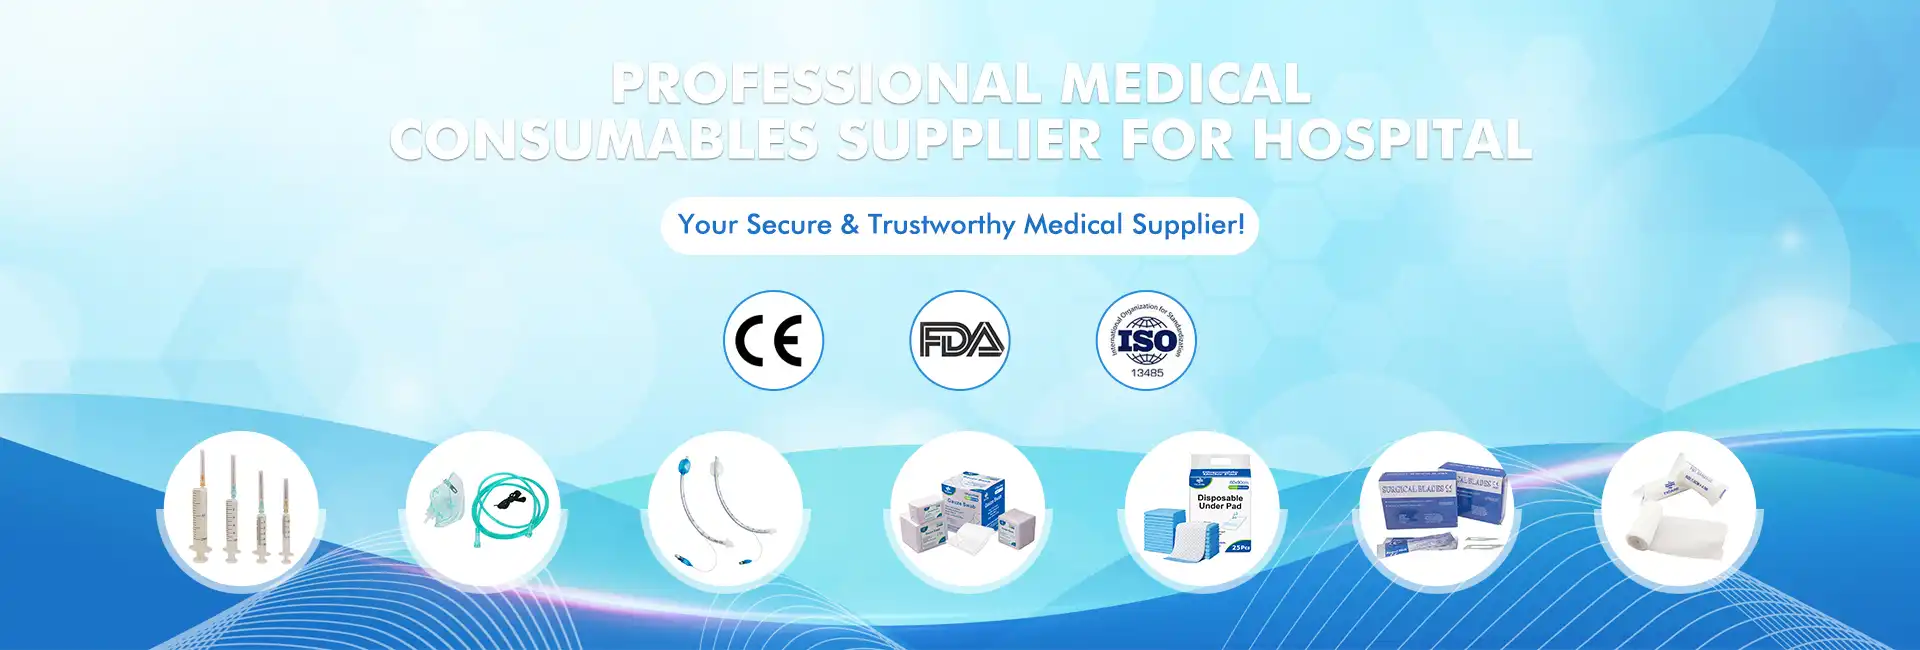 Professional Medical Consumables Supplier for Hospital